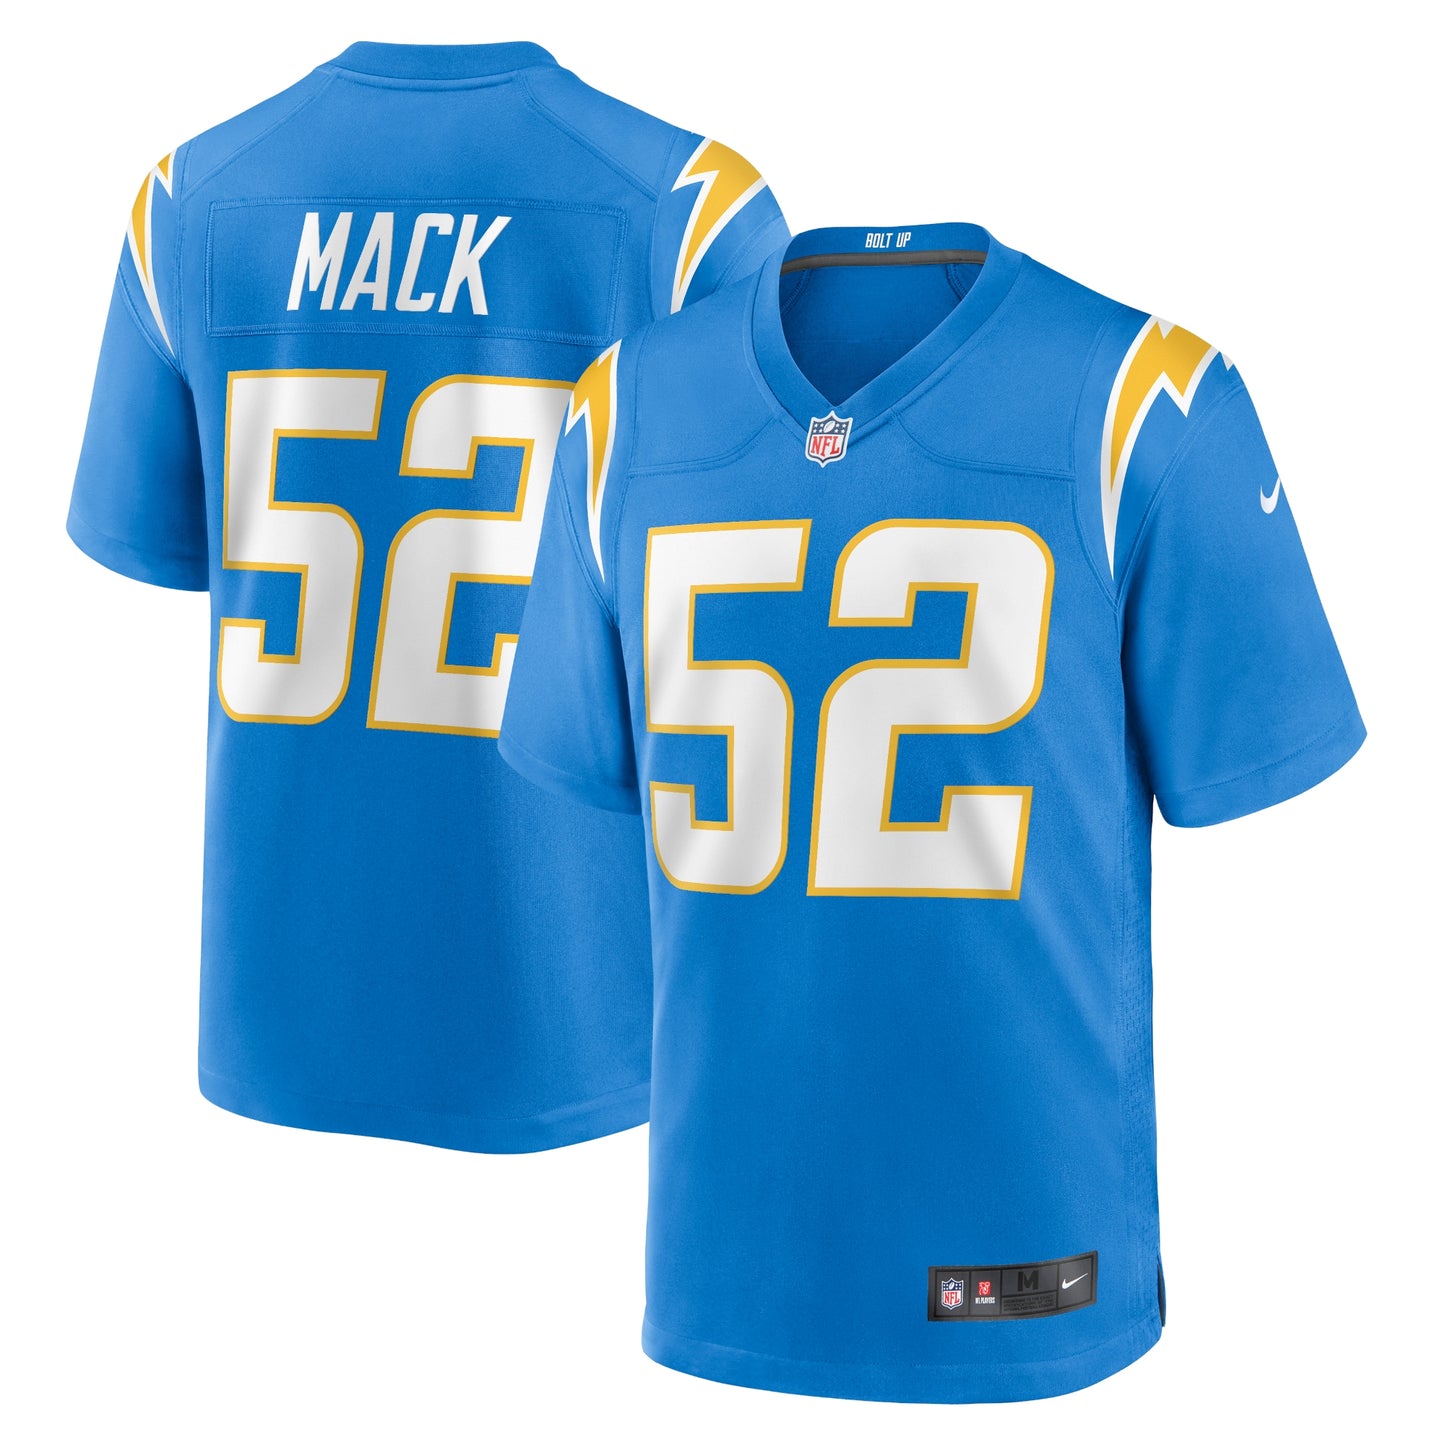 Khalil Mack Los Angeles Chargers Nike Youth Game Jersey - Powder Blue